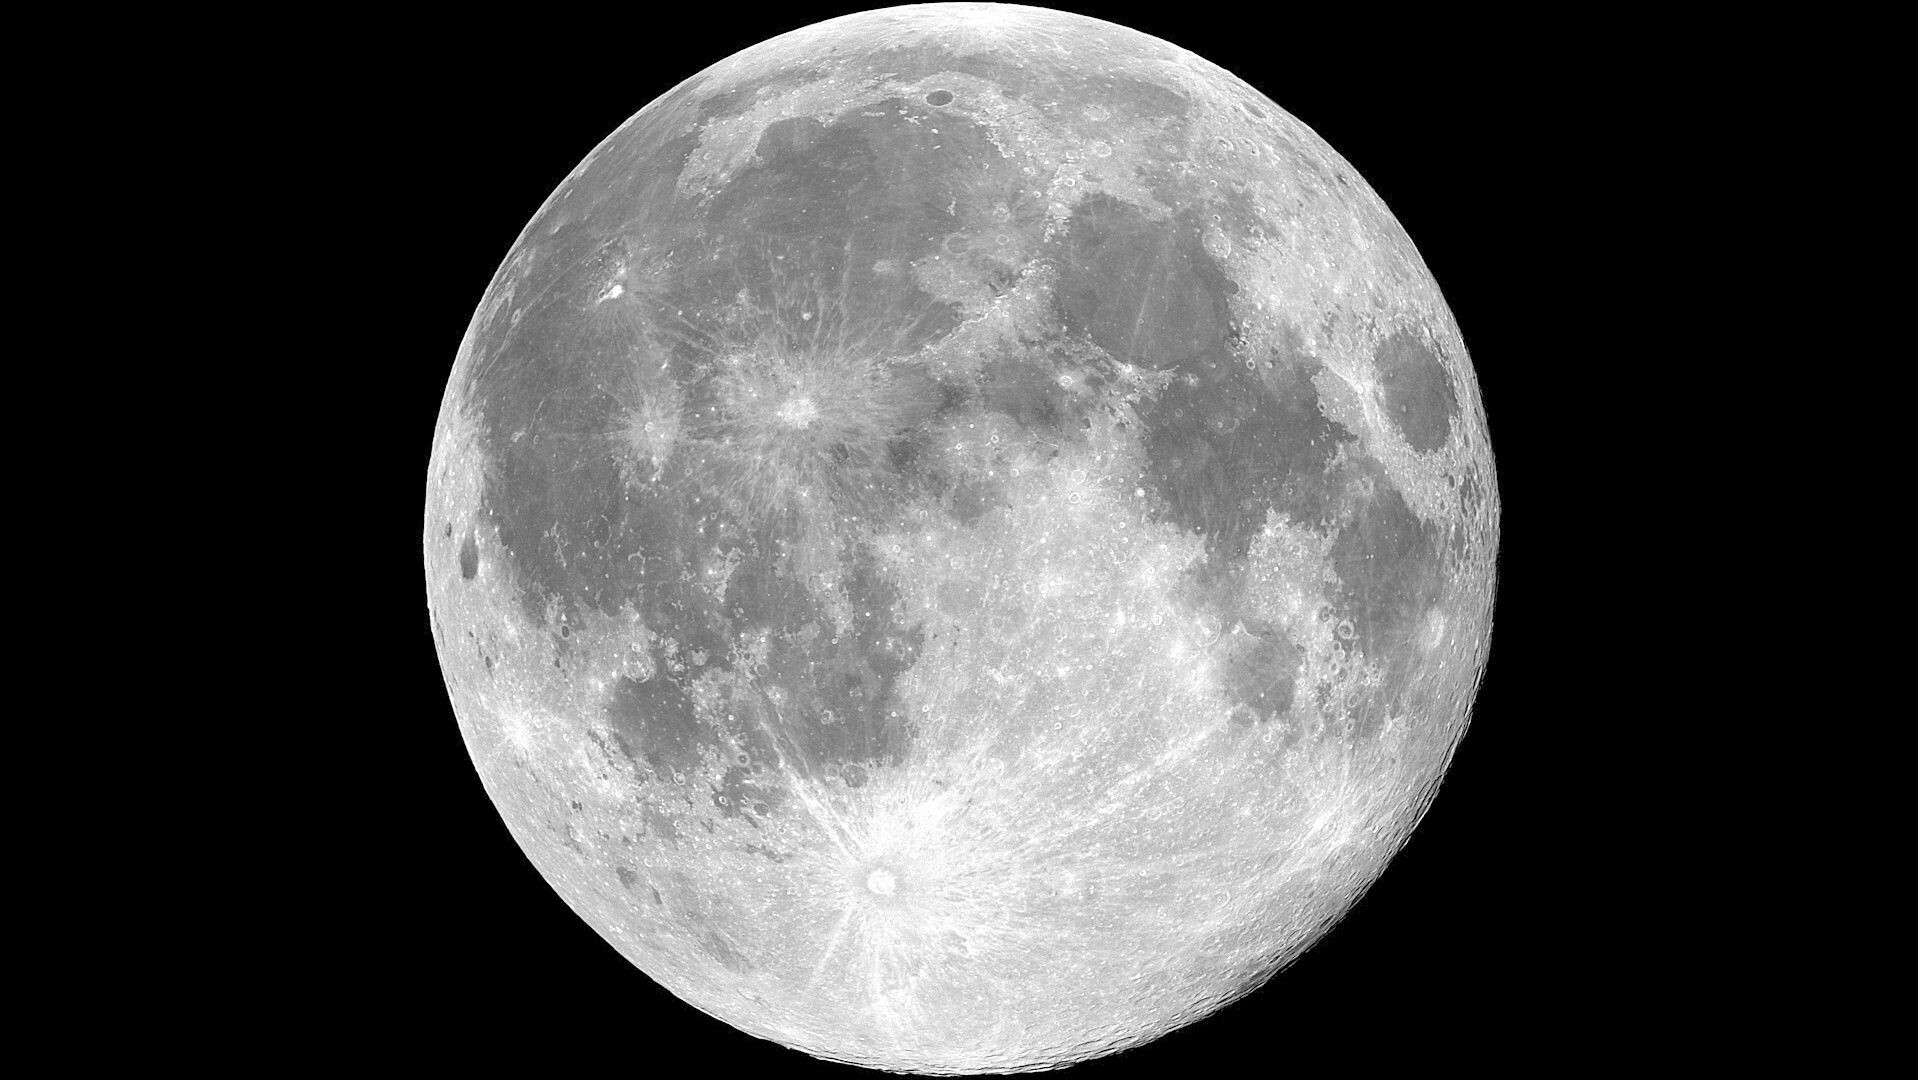 51+ NASA Moon Wallpapers: HD, 4K, 5K for PC and Mobile | Download free  images for iPhone, Android